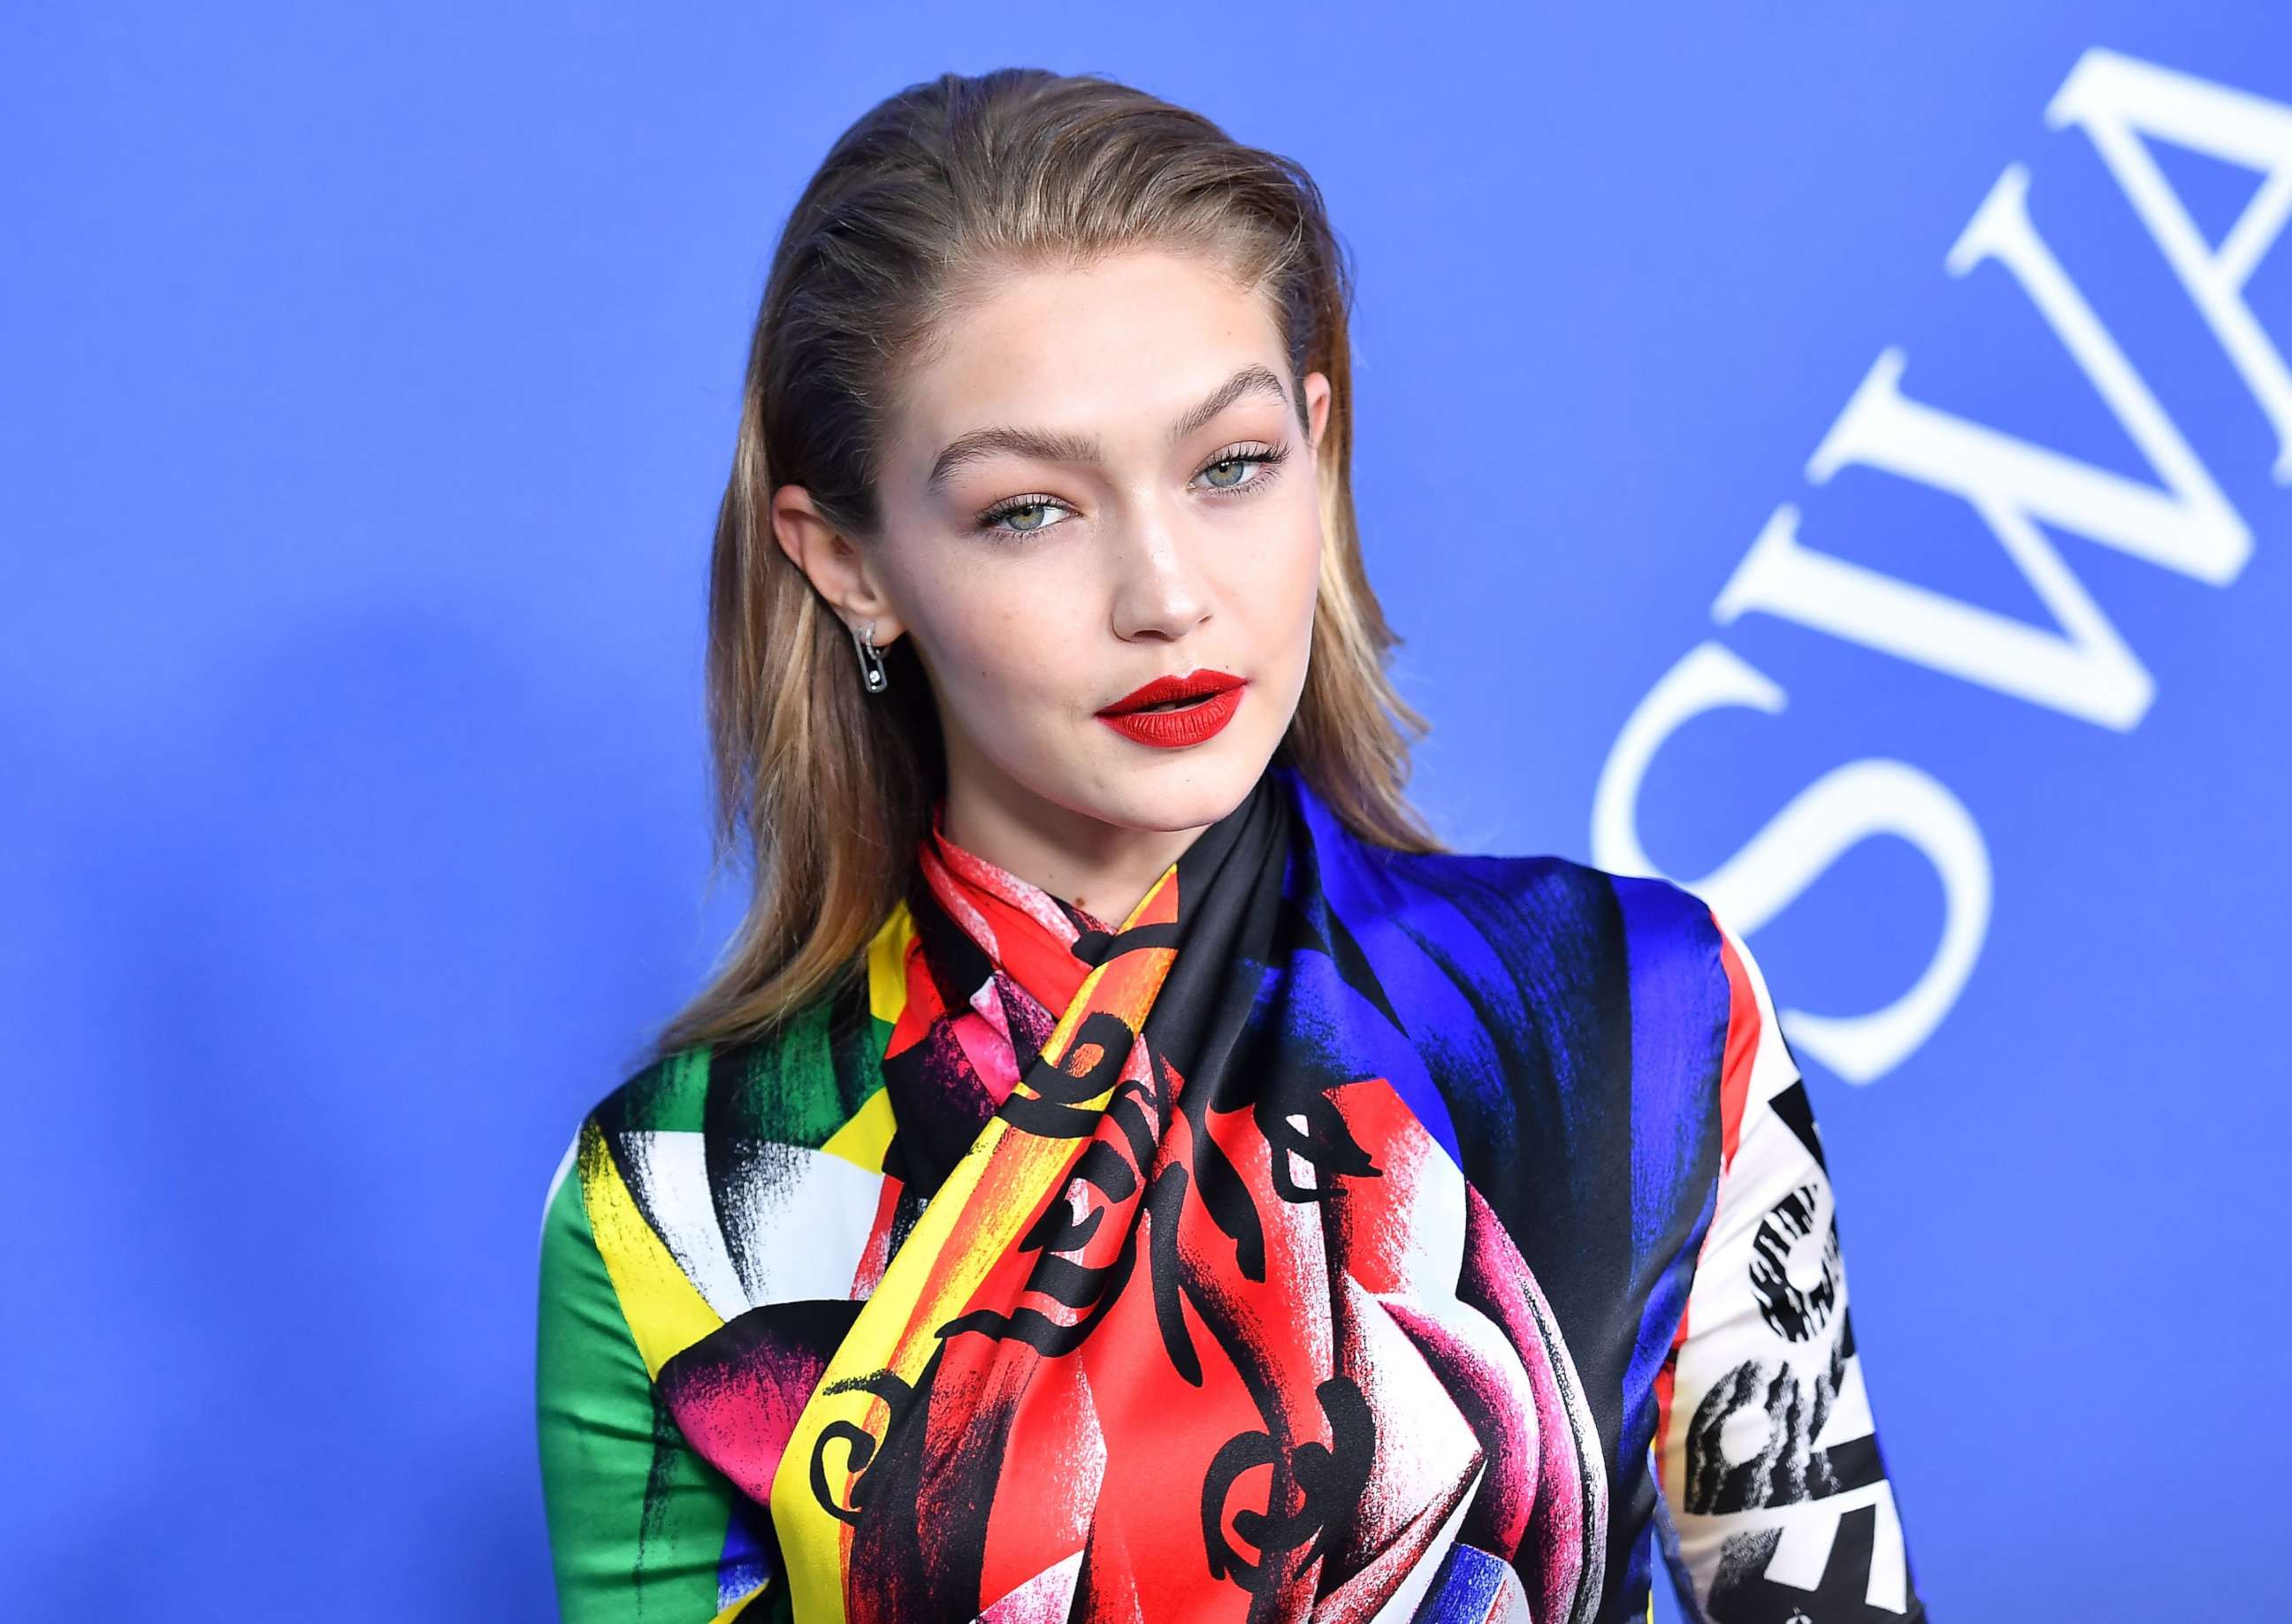 PHOTO: U.S. model Gigi Hadid arrives at the 2018 CFDA Fashion awards, June 4, 2018, at The Brooklyn Museum in New York City.